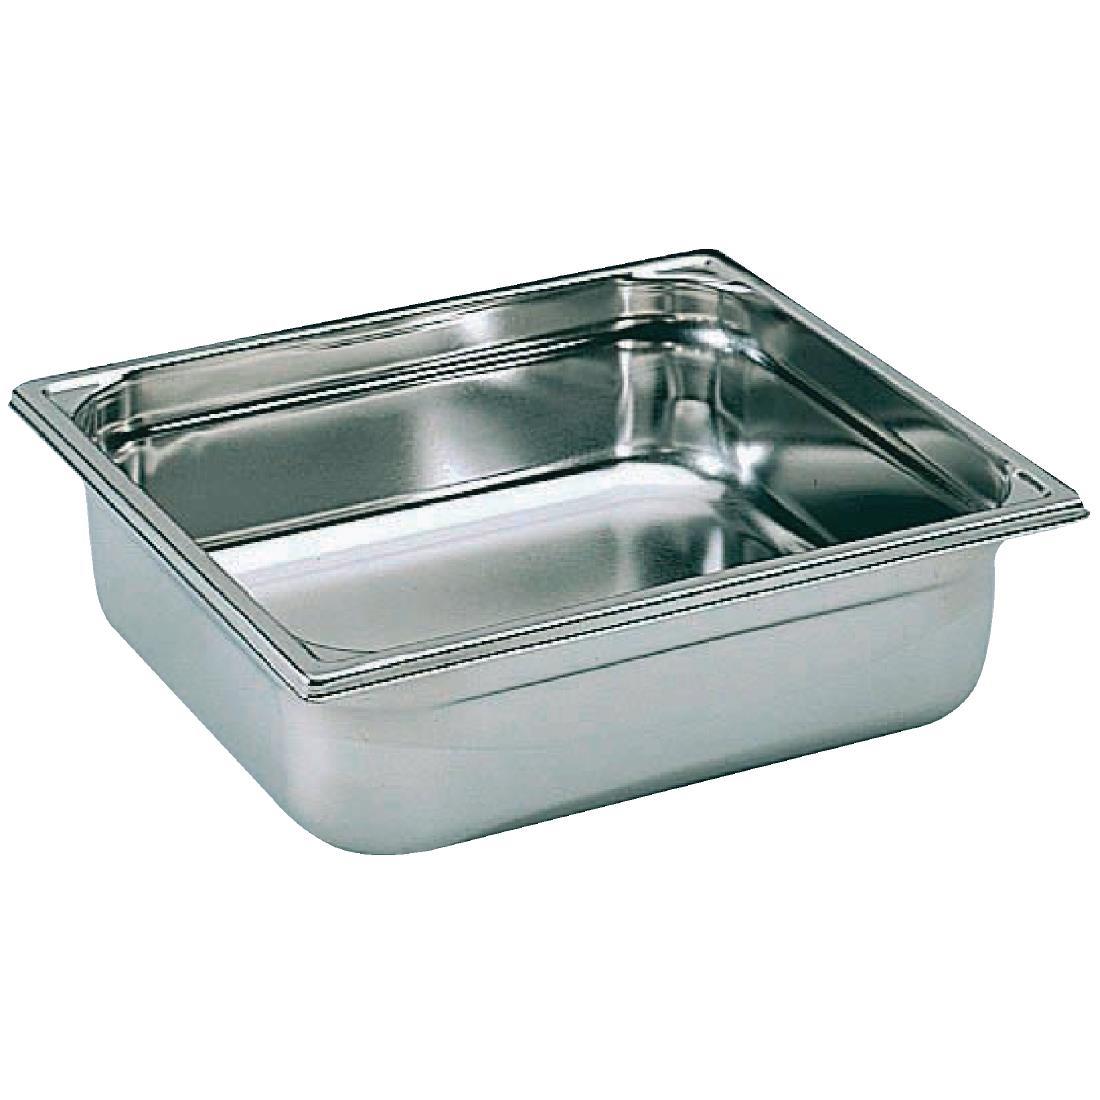 Matfer Bourgeat Stainless Steel 2/3 Gastronorm Pan 65mm - K055  - 1